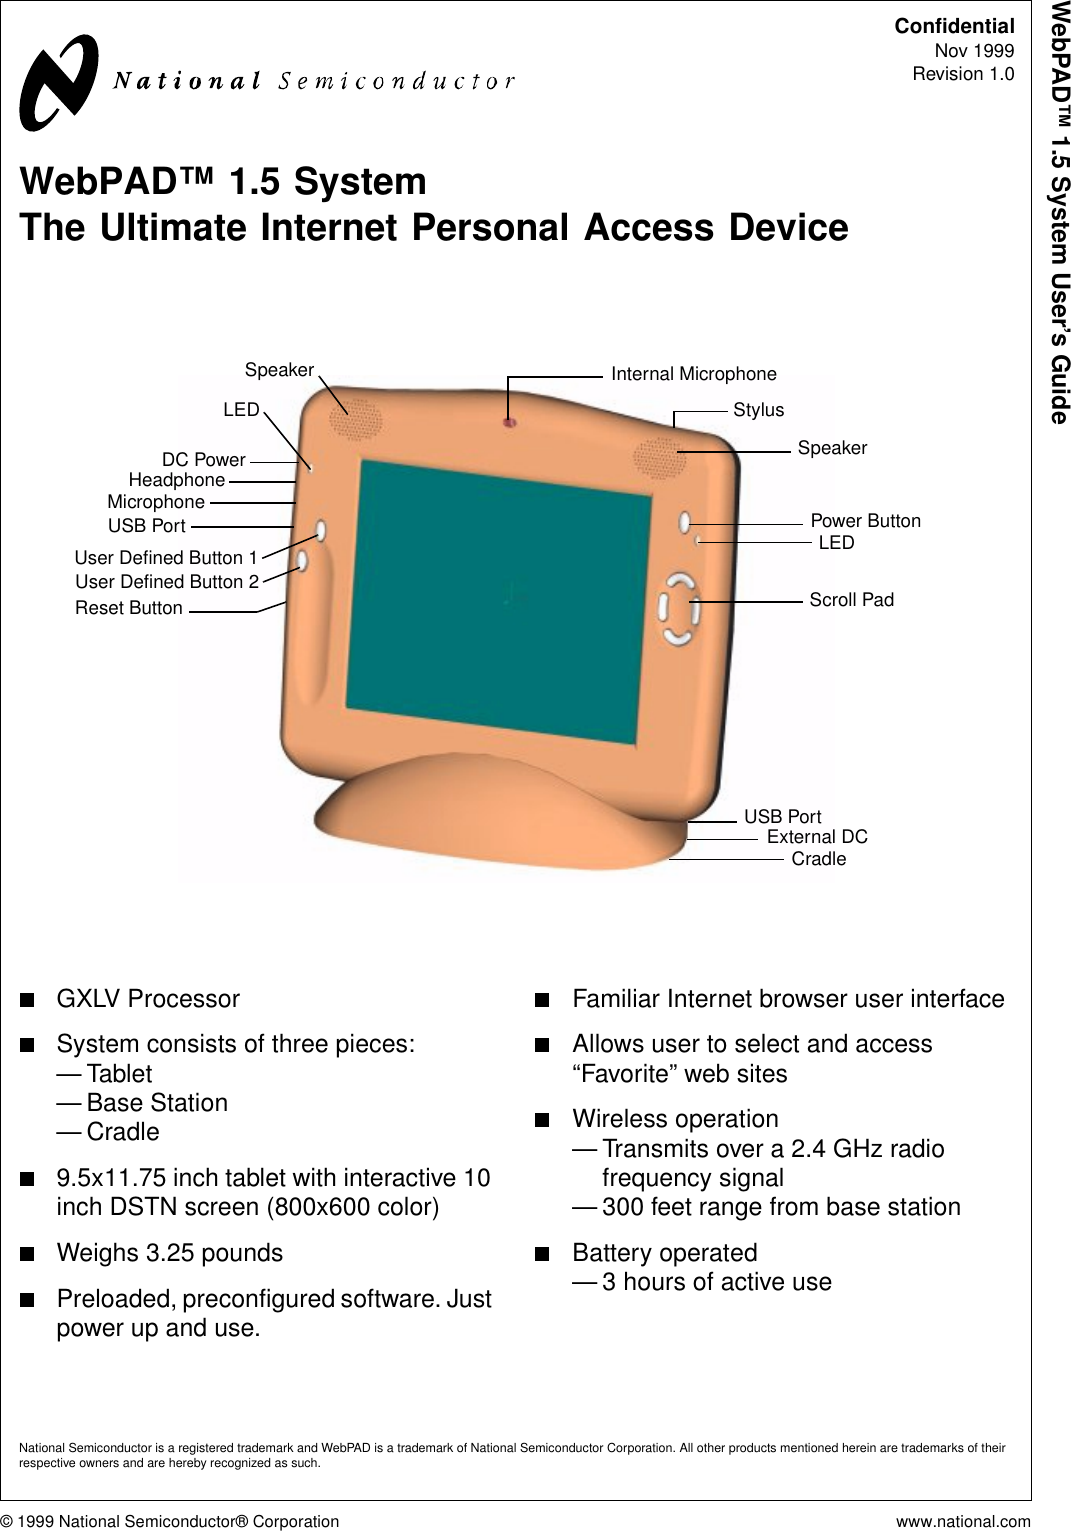 © 1999 National Semiconductor® Corporation www.national.comWebPAD™ 1.5 System User’s GuideConfidentialNov 1999Revision 1.0WebPAD™ 1.5 SystemThe Ultimate Internet Personal Access DeviceGXLV ProcessorSystem consists of three pieces:—Tablet— Base Station—Cradle9.5x11.75 inch tablet with interactive 10inch DSTN screen (800x600 color)Weighs 3.25 poundsPreloaded, preconfigured software. Justpower up and use.Familiar Internet browser user interfaceAllows user to select and access“Favorite” web sitesWireless operation— Transmits over a 2.4 GHz radiofrequency signal— 300 feet range from base stationBattery operated— 3 hours of active useSpeakerInternal MicrophoneLEDUser Defined Button 1User Defined Button 2Power ButtonLEDScroll PadCradleDC PowerHeadphoneMicrophoneUSB PortSpeakerExternal DCReset ButtonStylusUSB PortNational Semiconductor is a registered trademark and WebPAD is a trademark of National Semiconductor Corporation. All other products mentioned herein are trademarks of theirrespective owners and are hereby recognized as such.